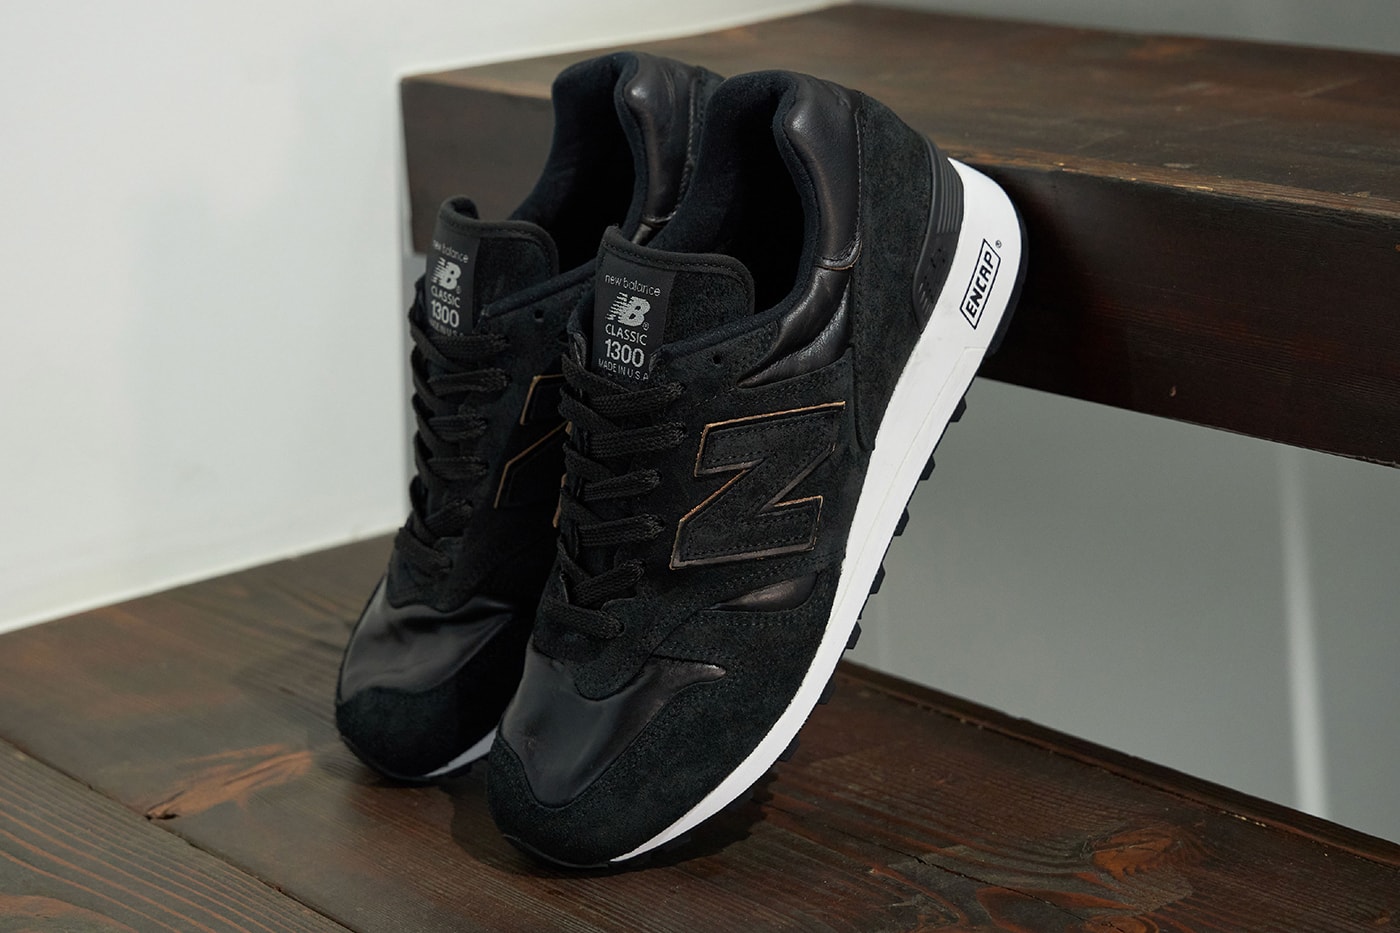 New Balance MADE in USA M1300AT black menswear streetwear kicks shoes trainers runners spring summer 2021 ss21 collection